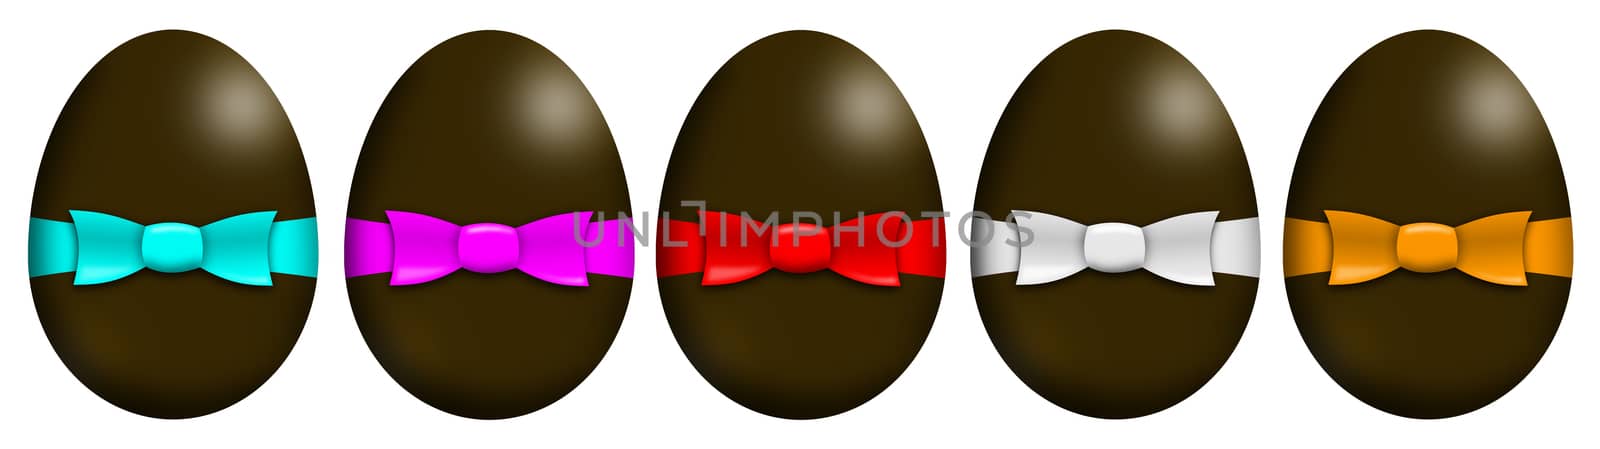 Five easter eggs with blue pink red silver gold ribbon illustration on white with clipping path by VivacityImages